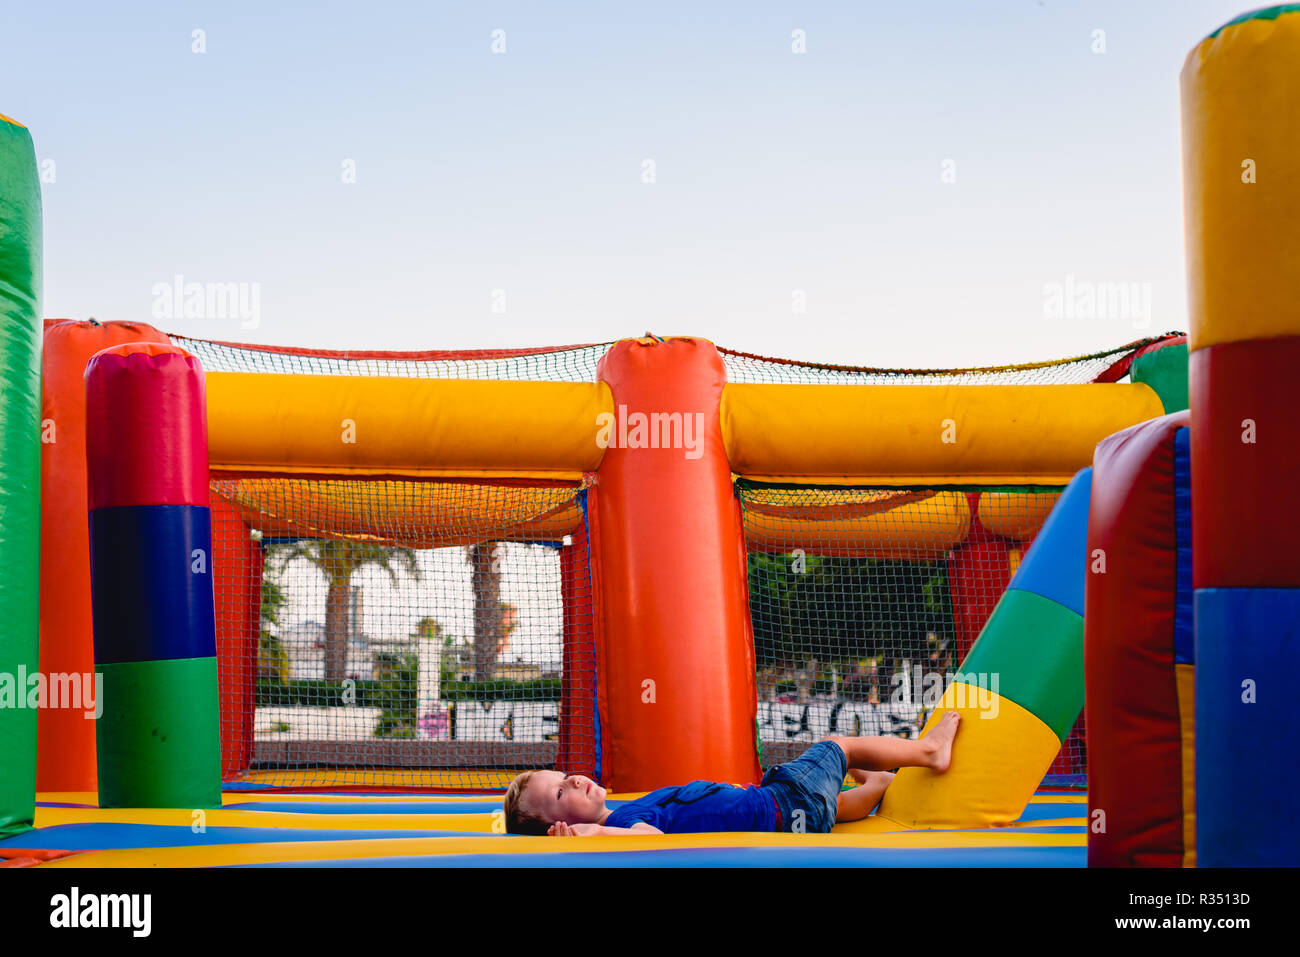 Inflatable castle of many colors without anyone. Stock Photo